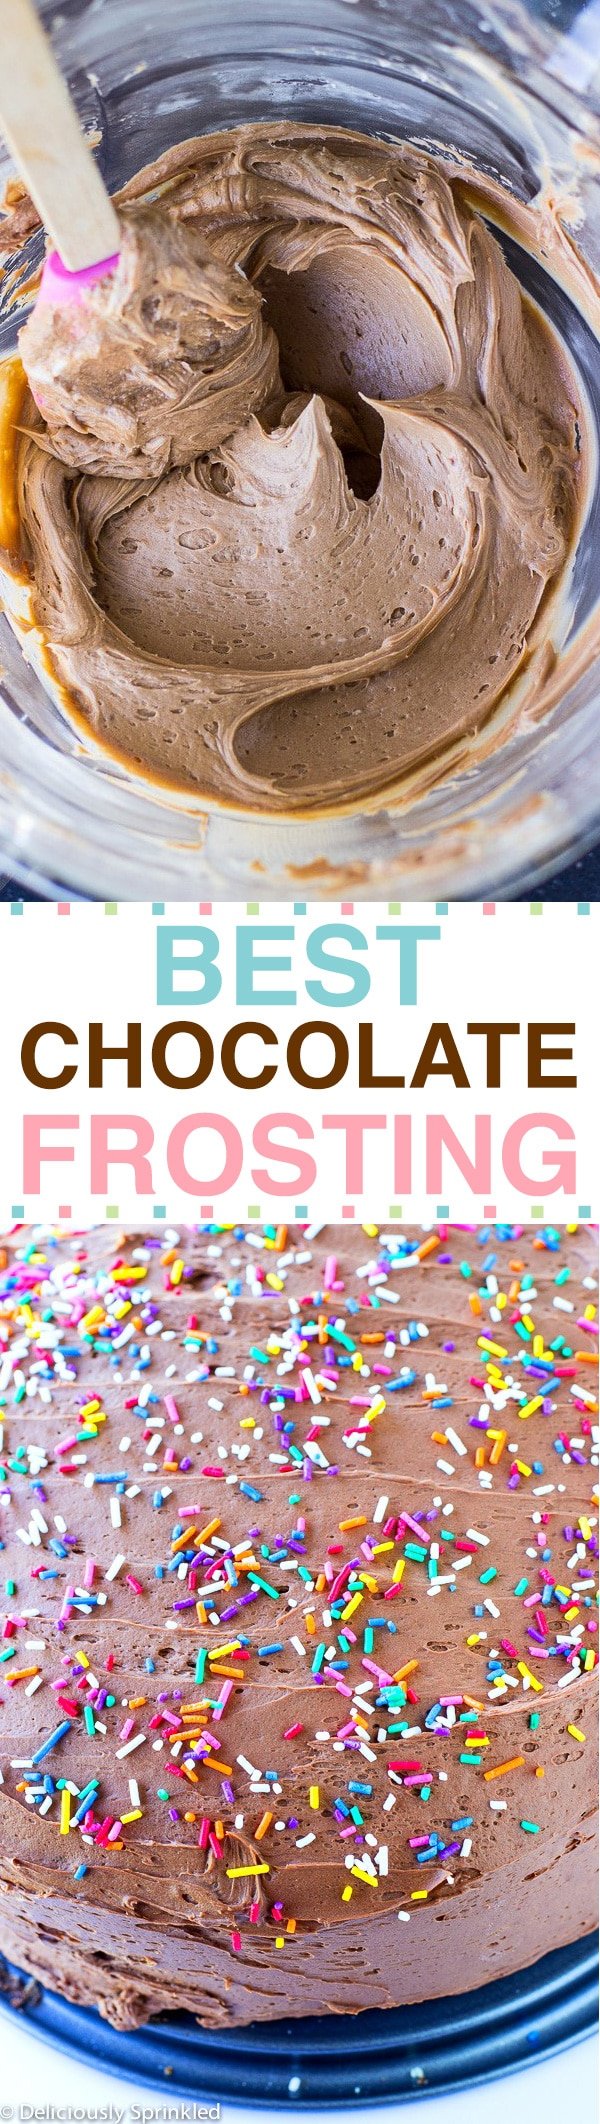 THE BEST CHOCOLATE FROSTING RECIPE